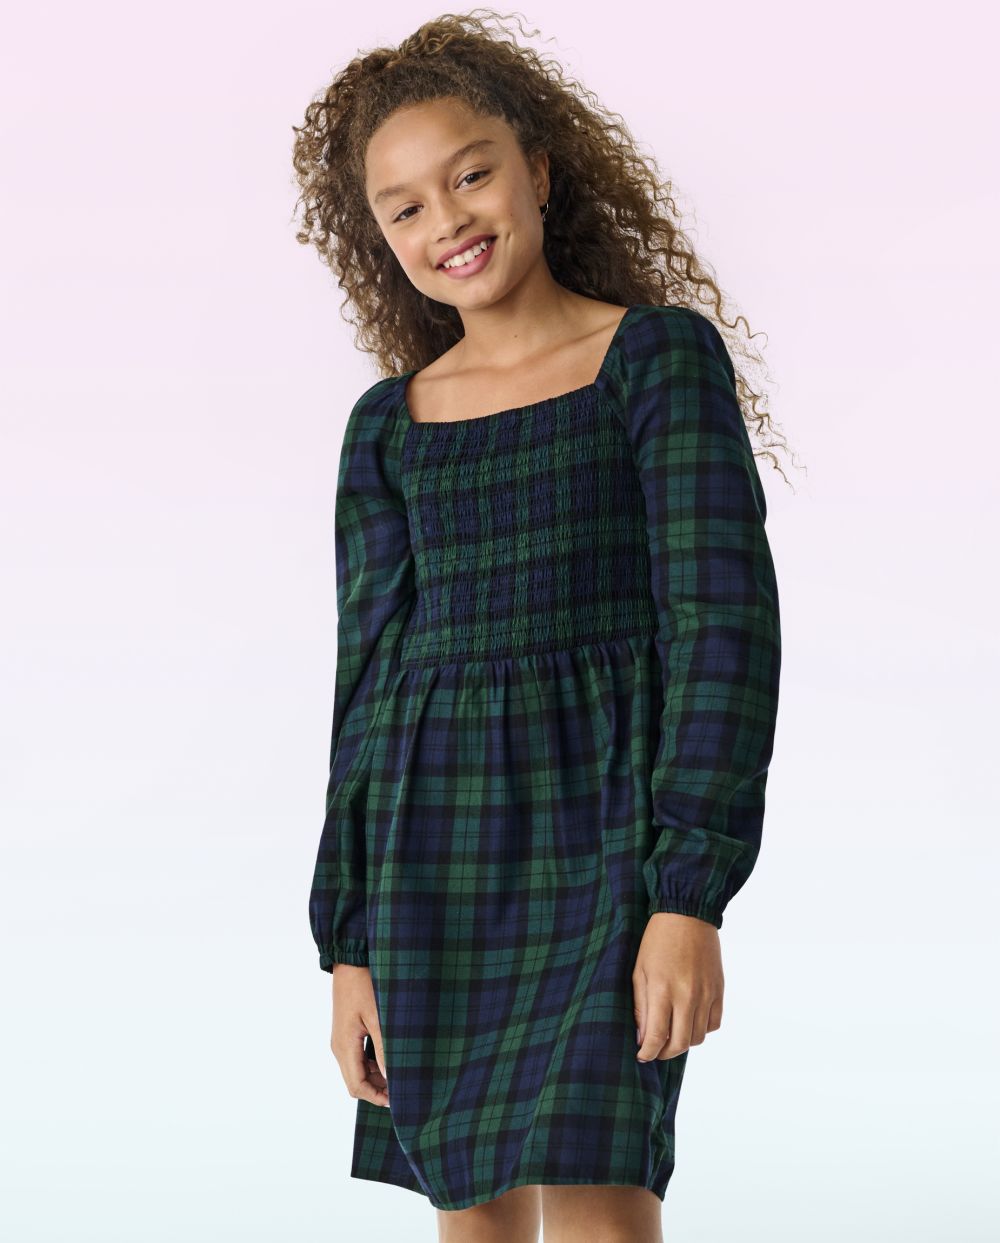 Girls Plaid Print Long Puff Sleeves Sleeves Above the Knee Smocked Square Neck Dress